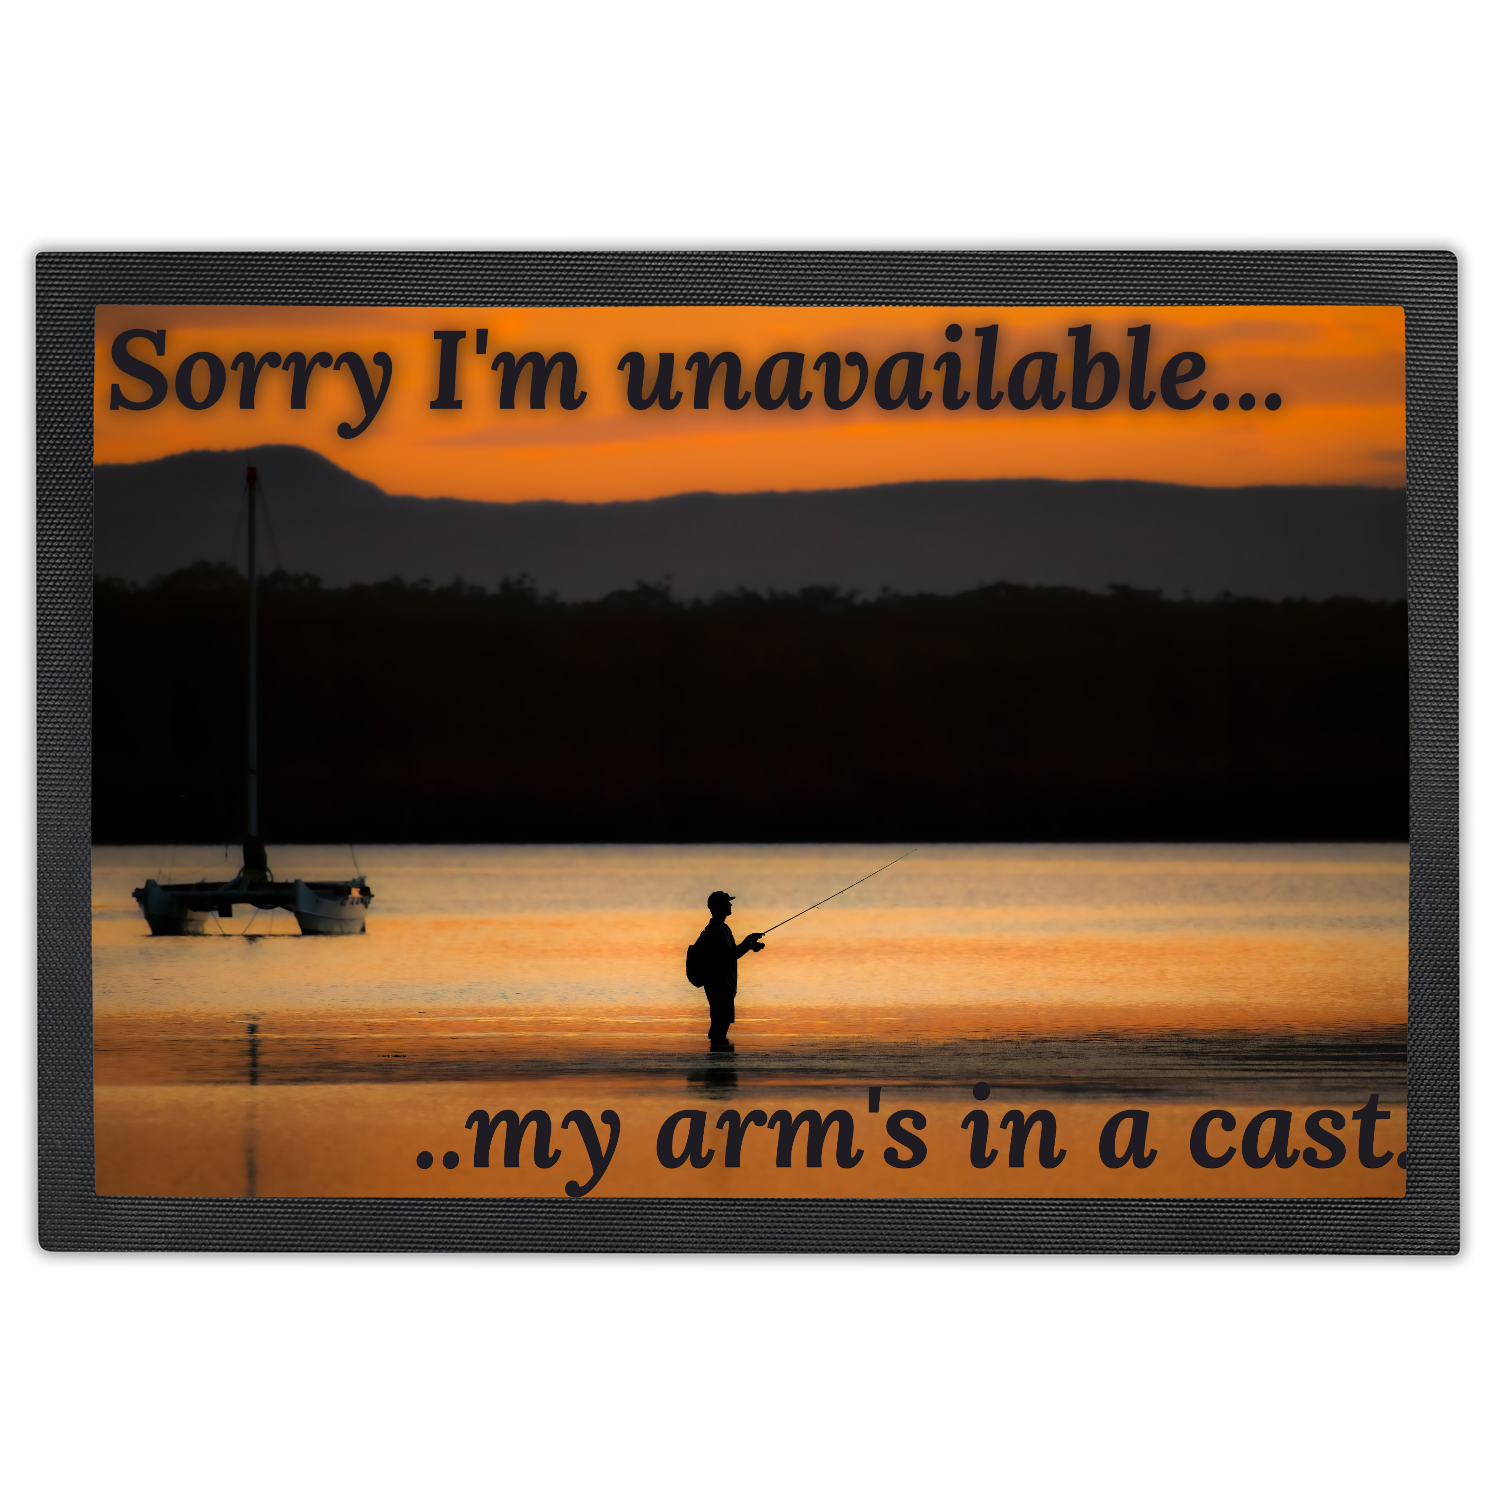 Sorry I'm unavailable, my arm's in a cast. Fisherman's Doormat